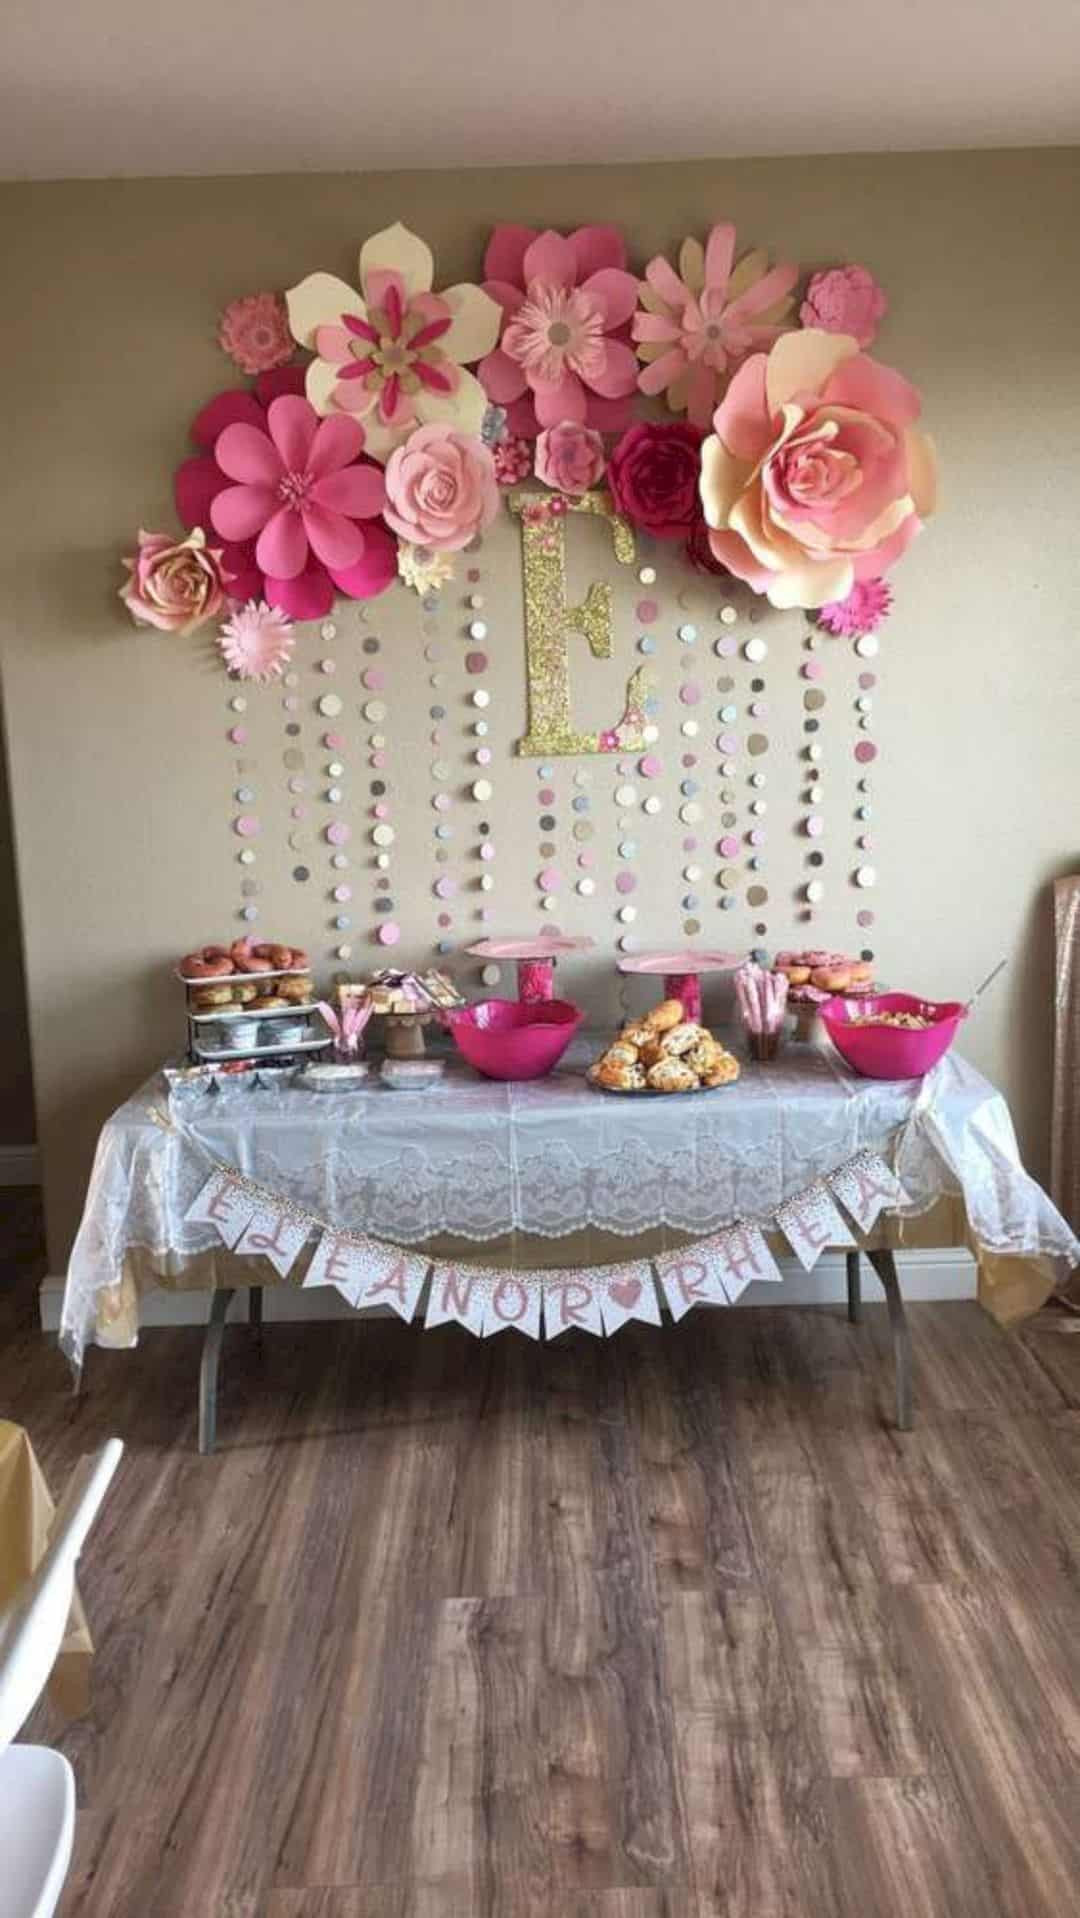 Baby Shower Ideas For A Girl Decorations
 16 Cute Baby Shower Decorating Ideas